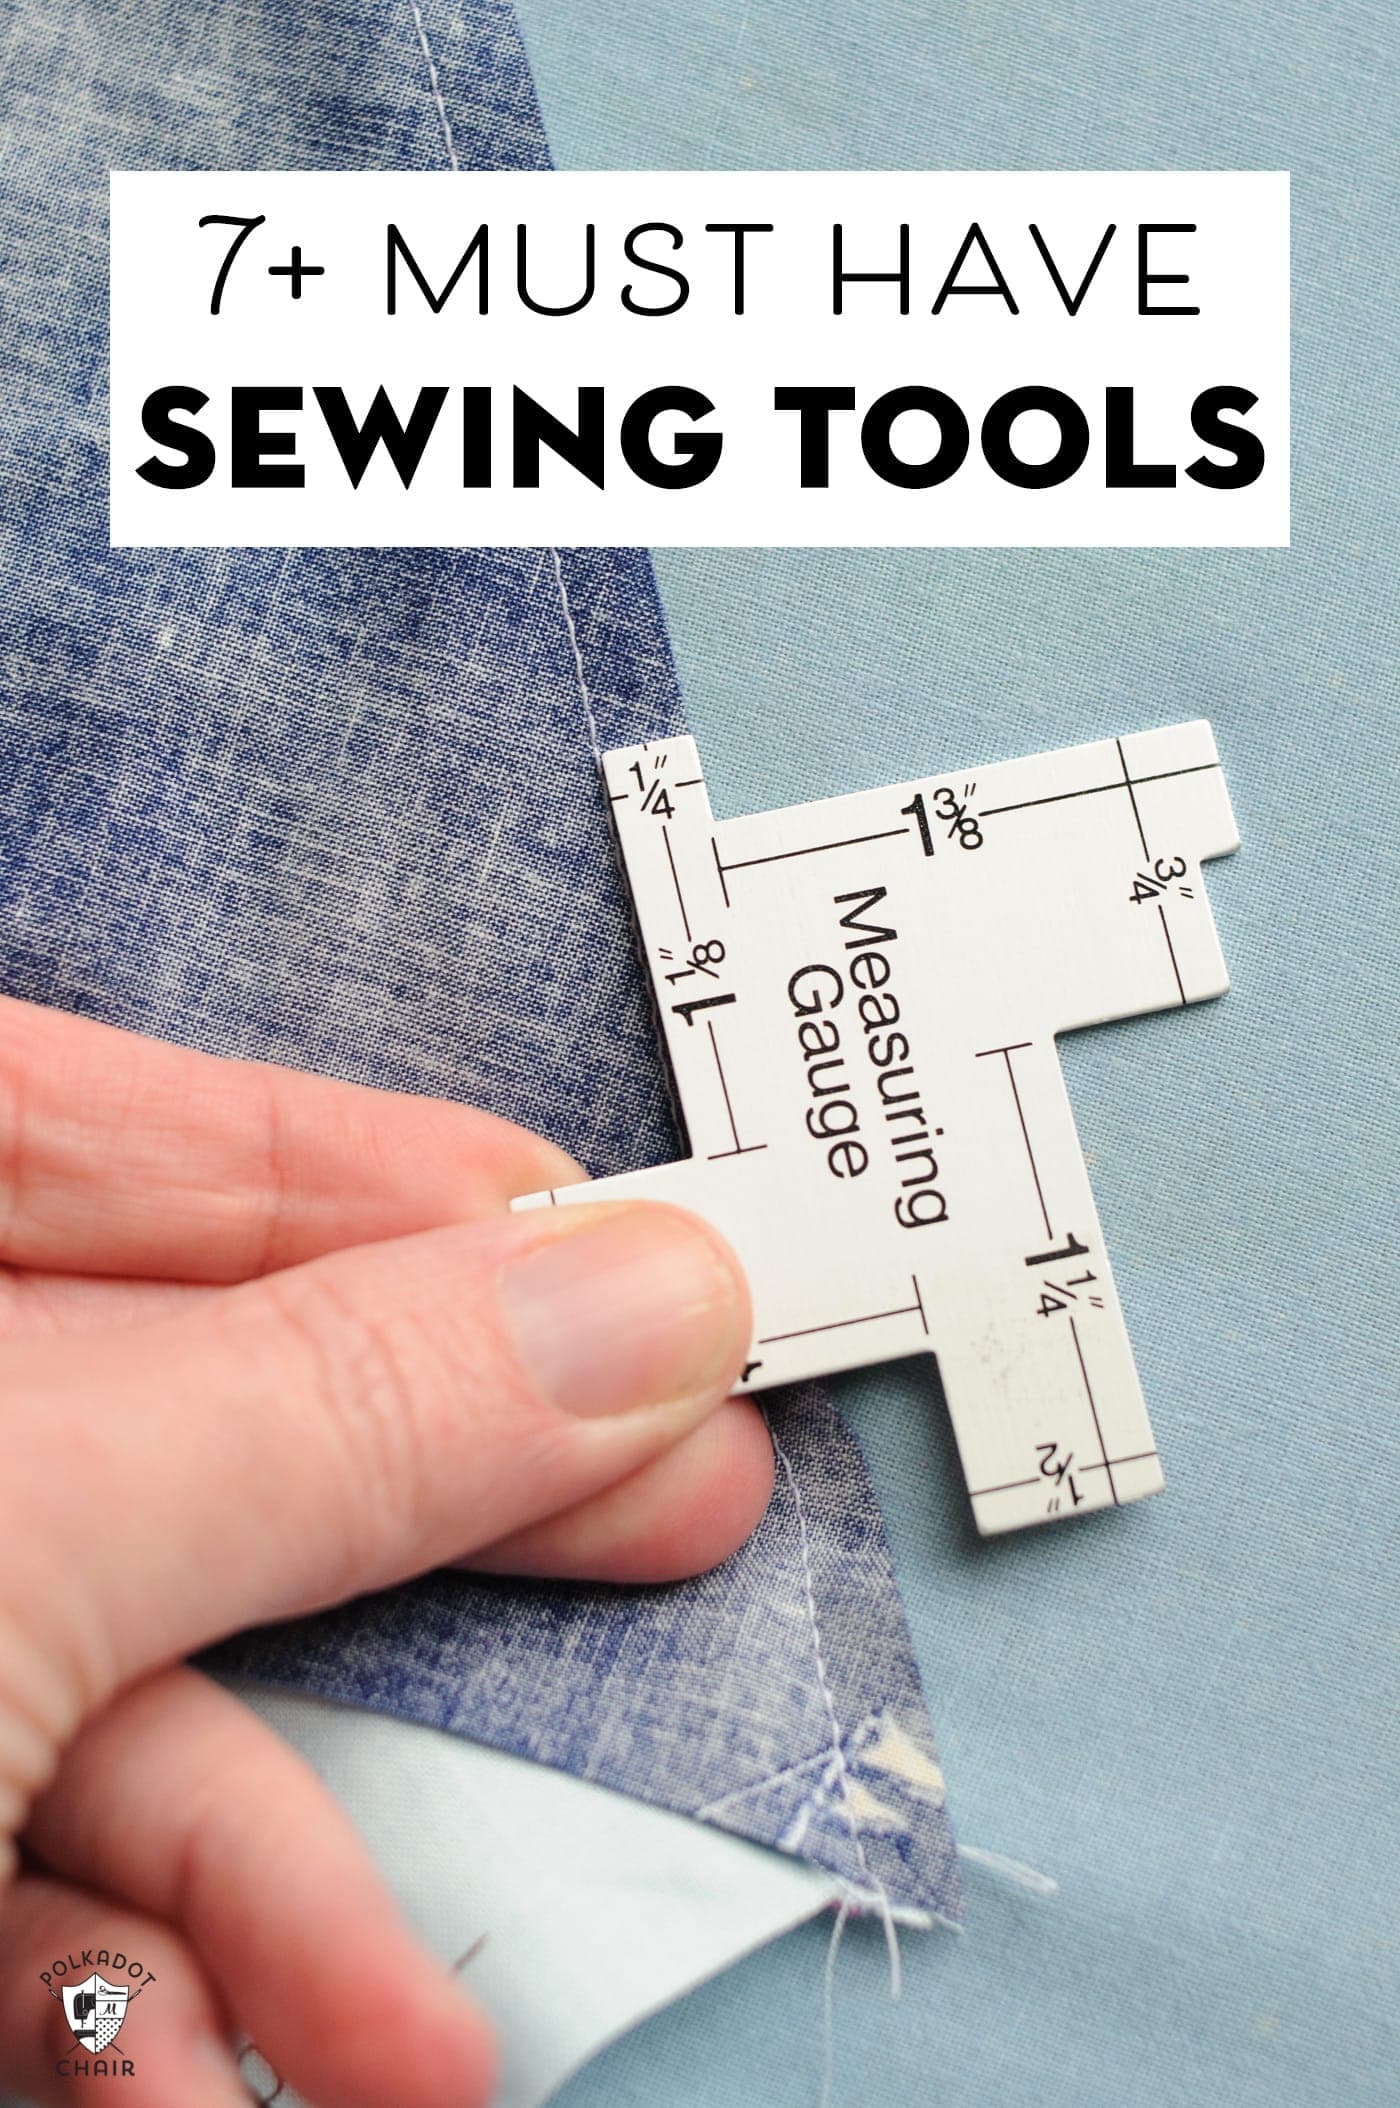 Sewing Notions - I Sew Need It